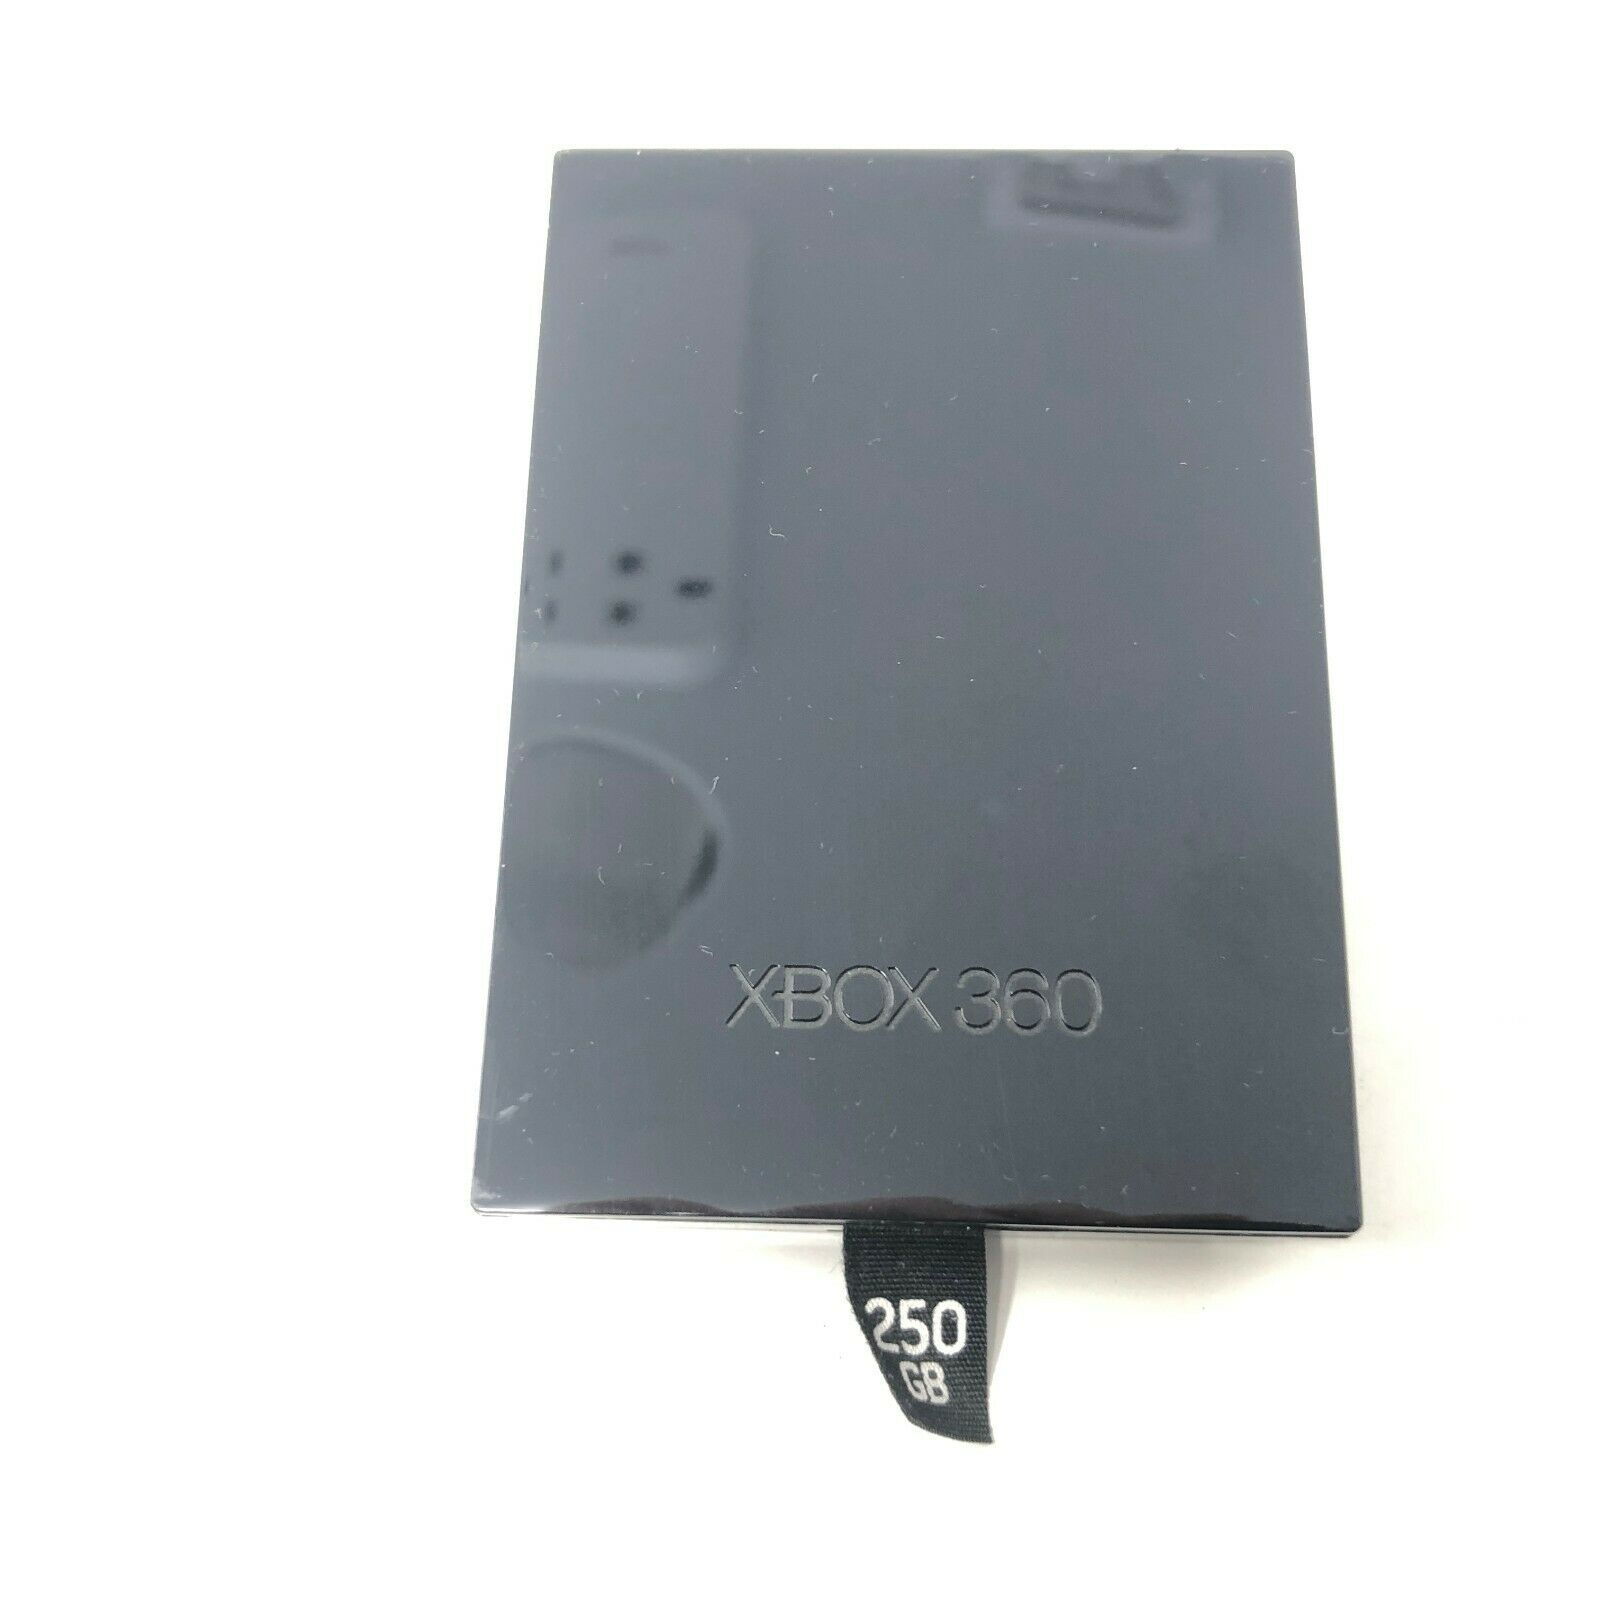 Official Xbox 360 250gb Hdd Internal Hard Drive For S Slim Or E